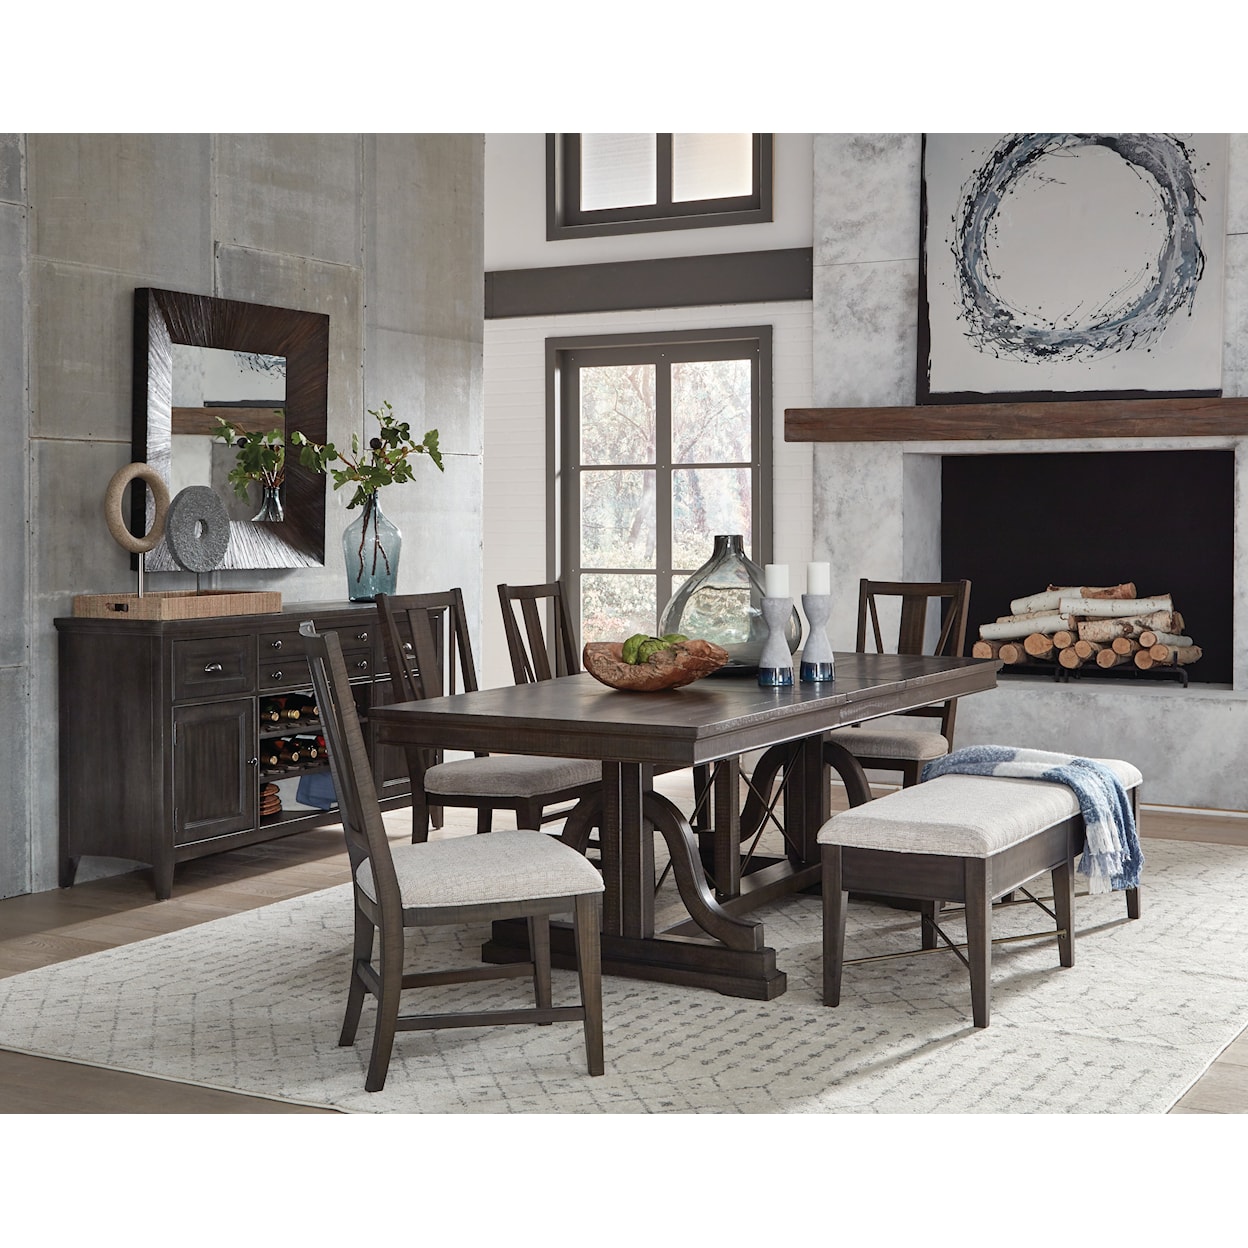 Magnussen Home Westley Falls Dining 6-Piece Dining Set w/ Bench